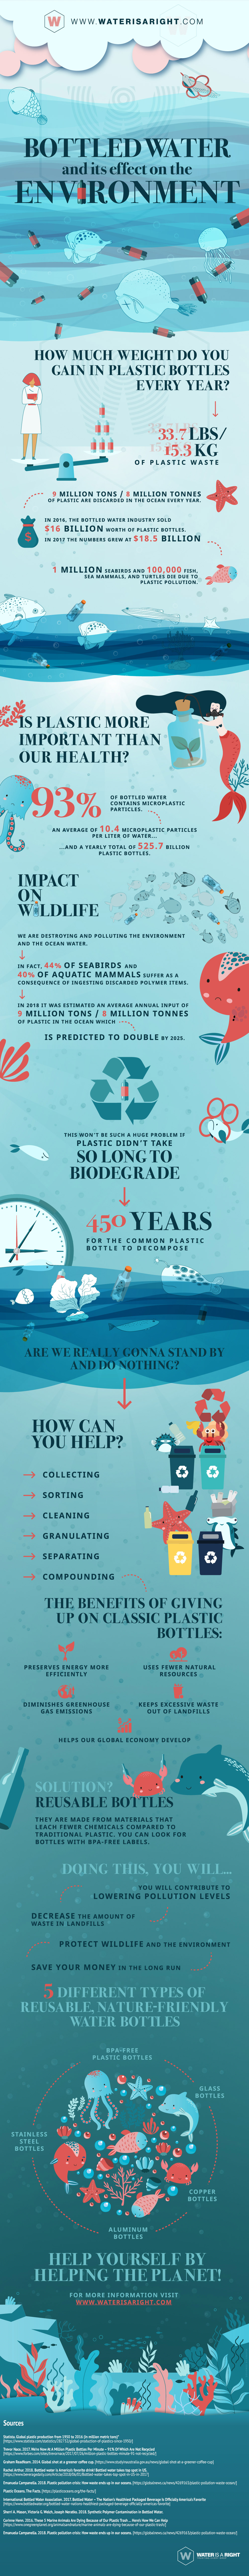 plastic pollution in the ocean infographic